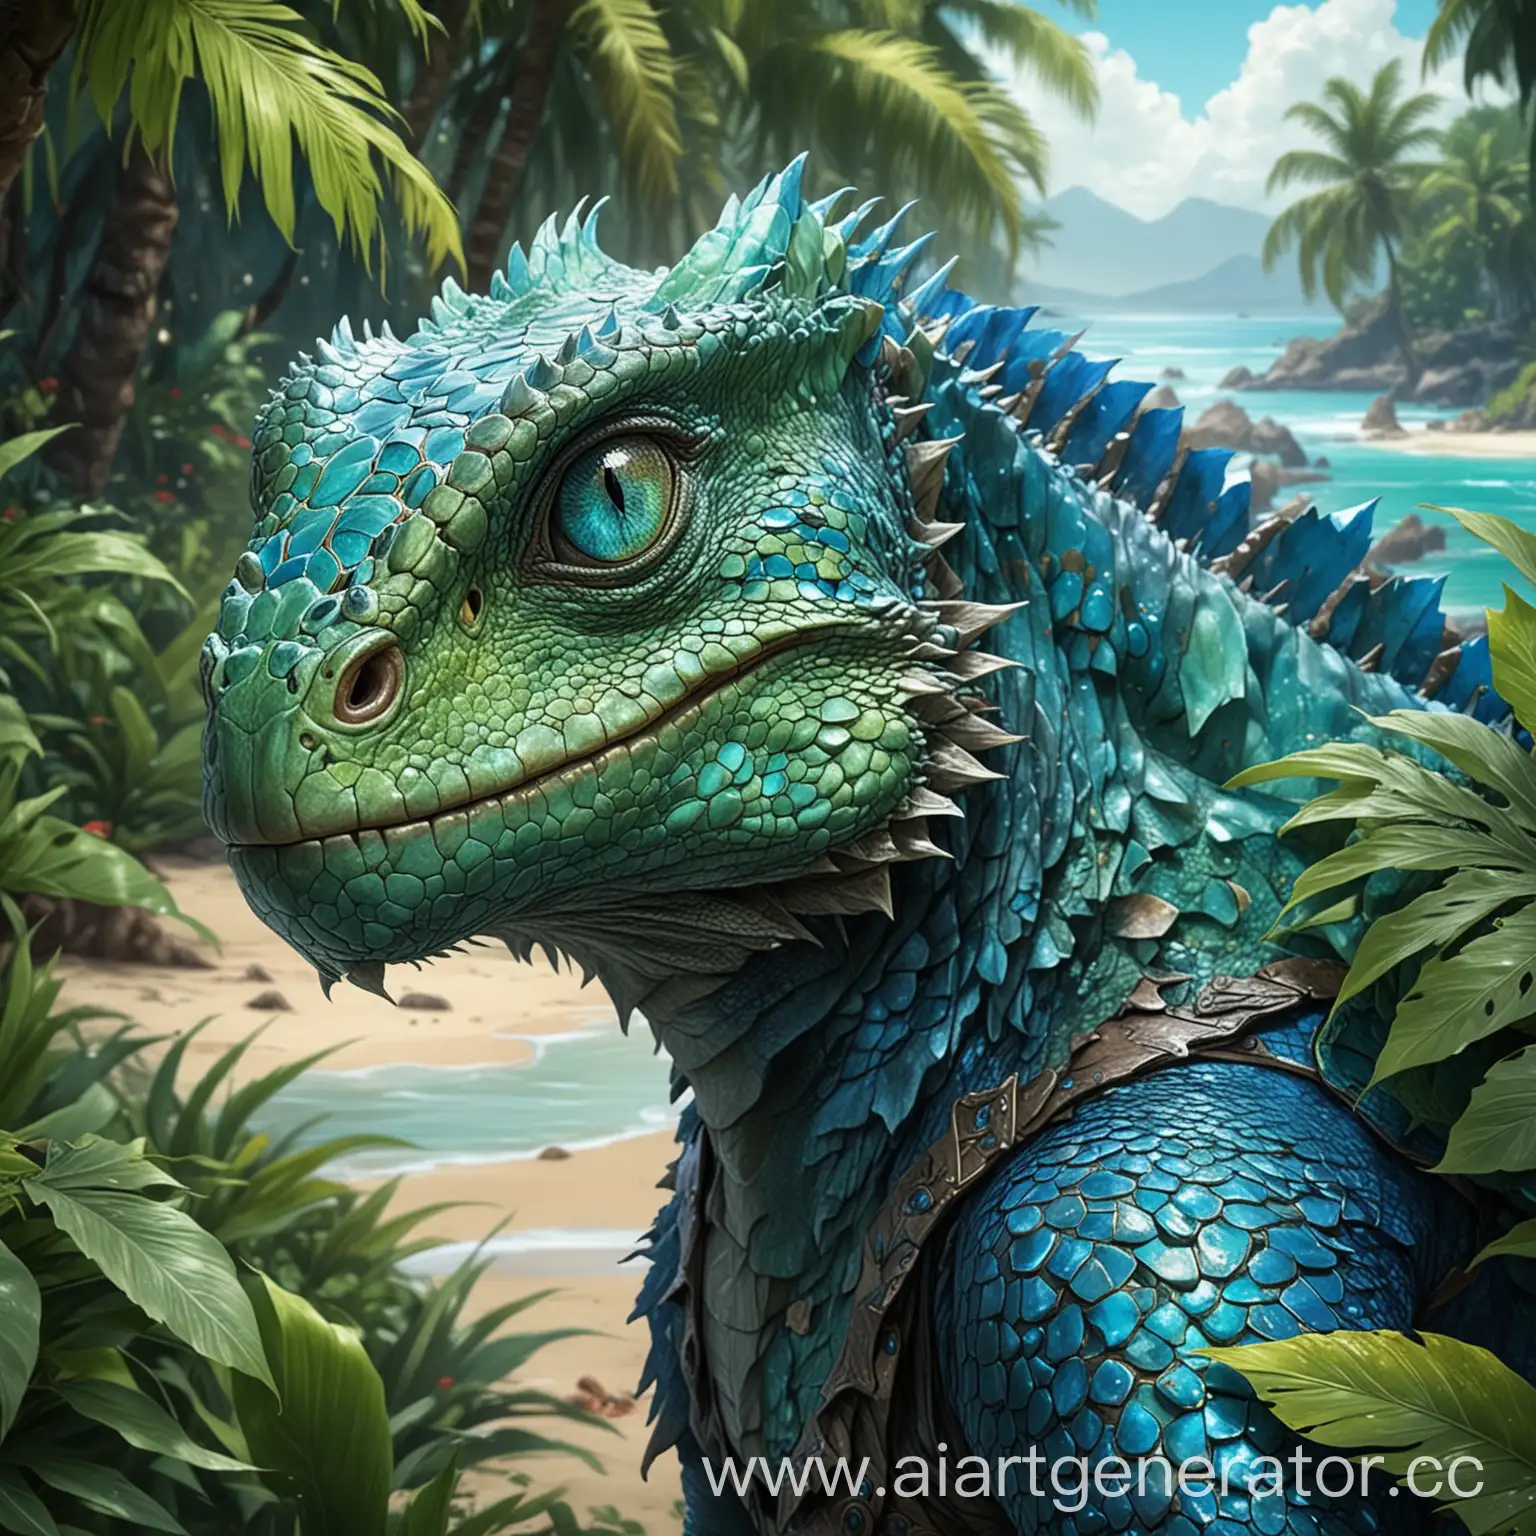 Mystical-Lizard-Creature-with-Enchanting-Blue-Eyes-in-Warcraft-Style-on-Tropical-Island